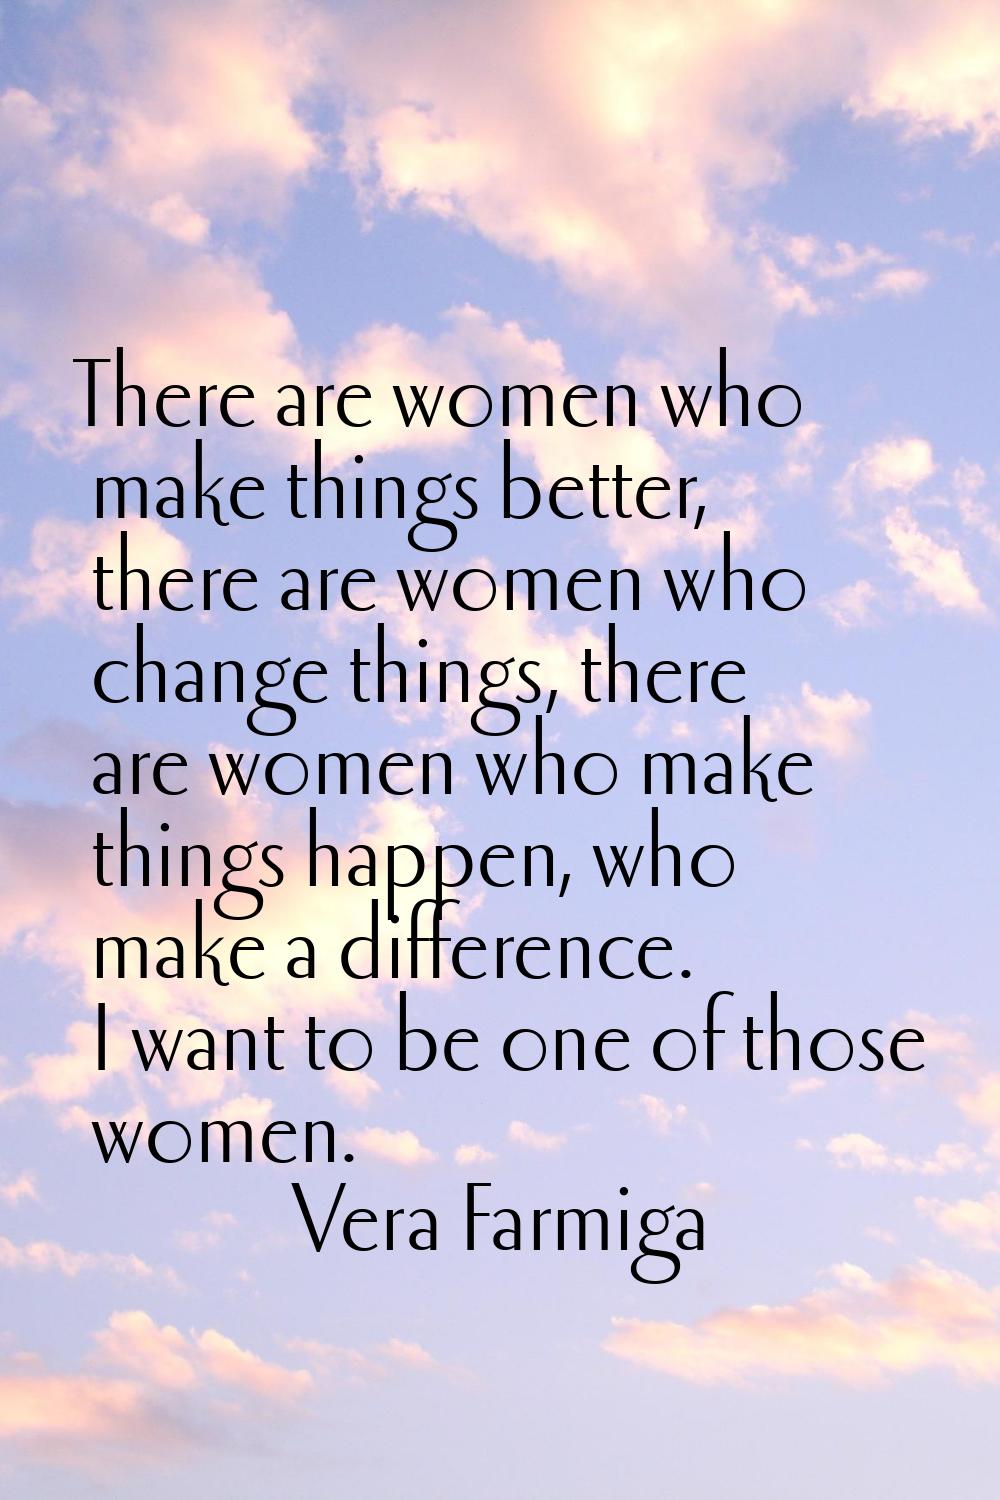 There are women who make things better, there are women who change things, there are women who make